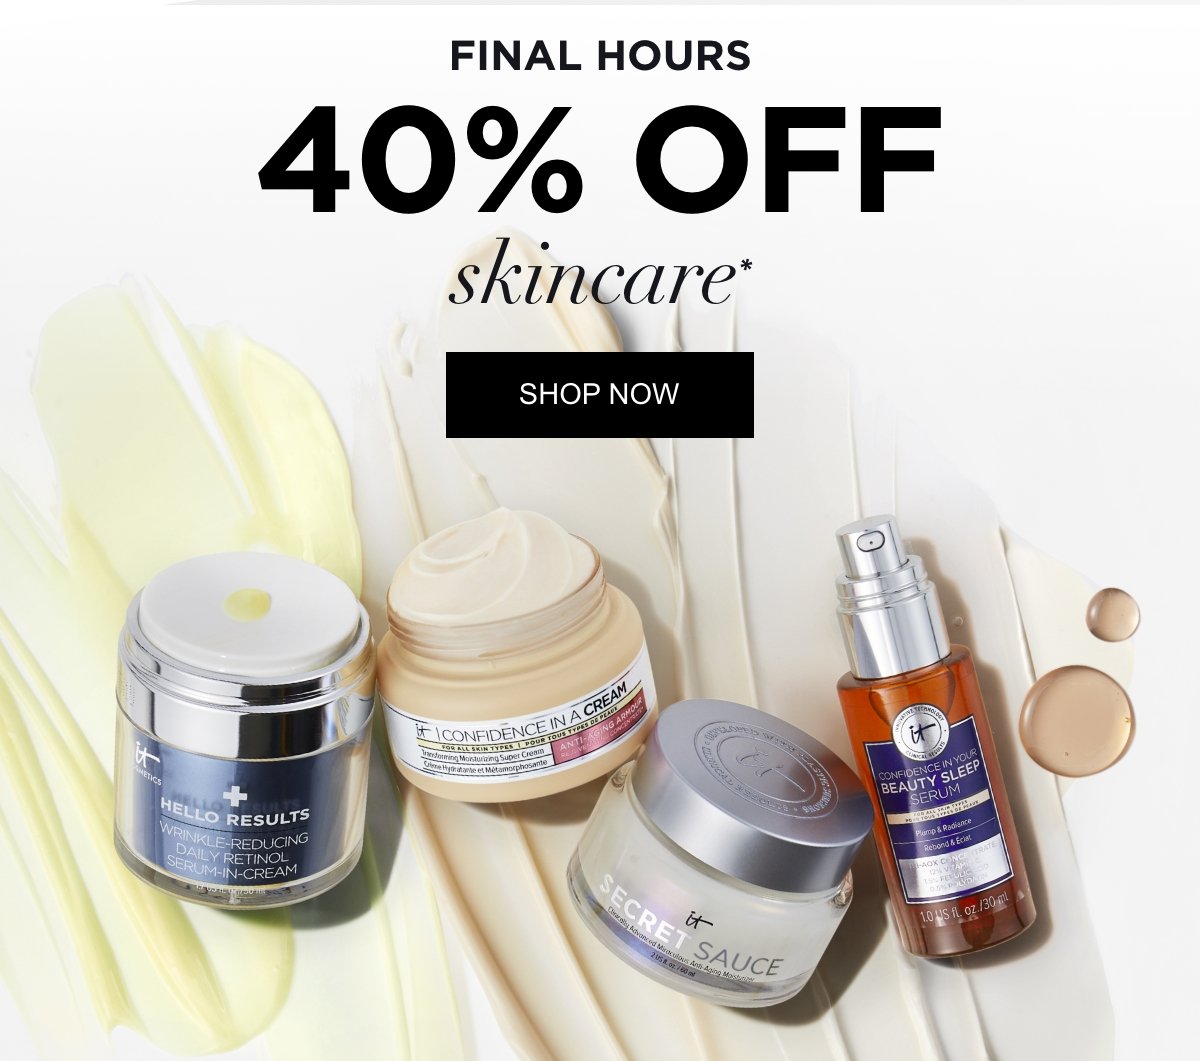 FINAL HOURS 40% OFF skincare